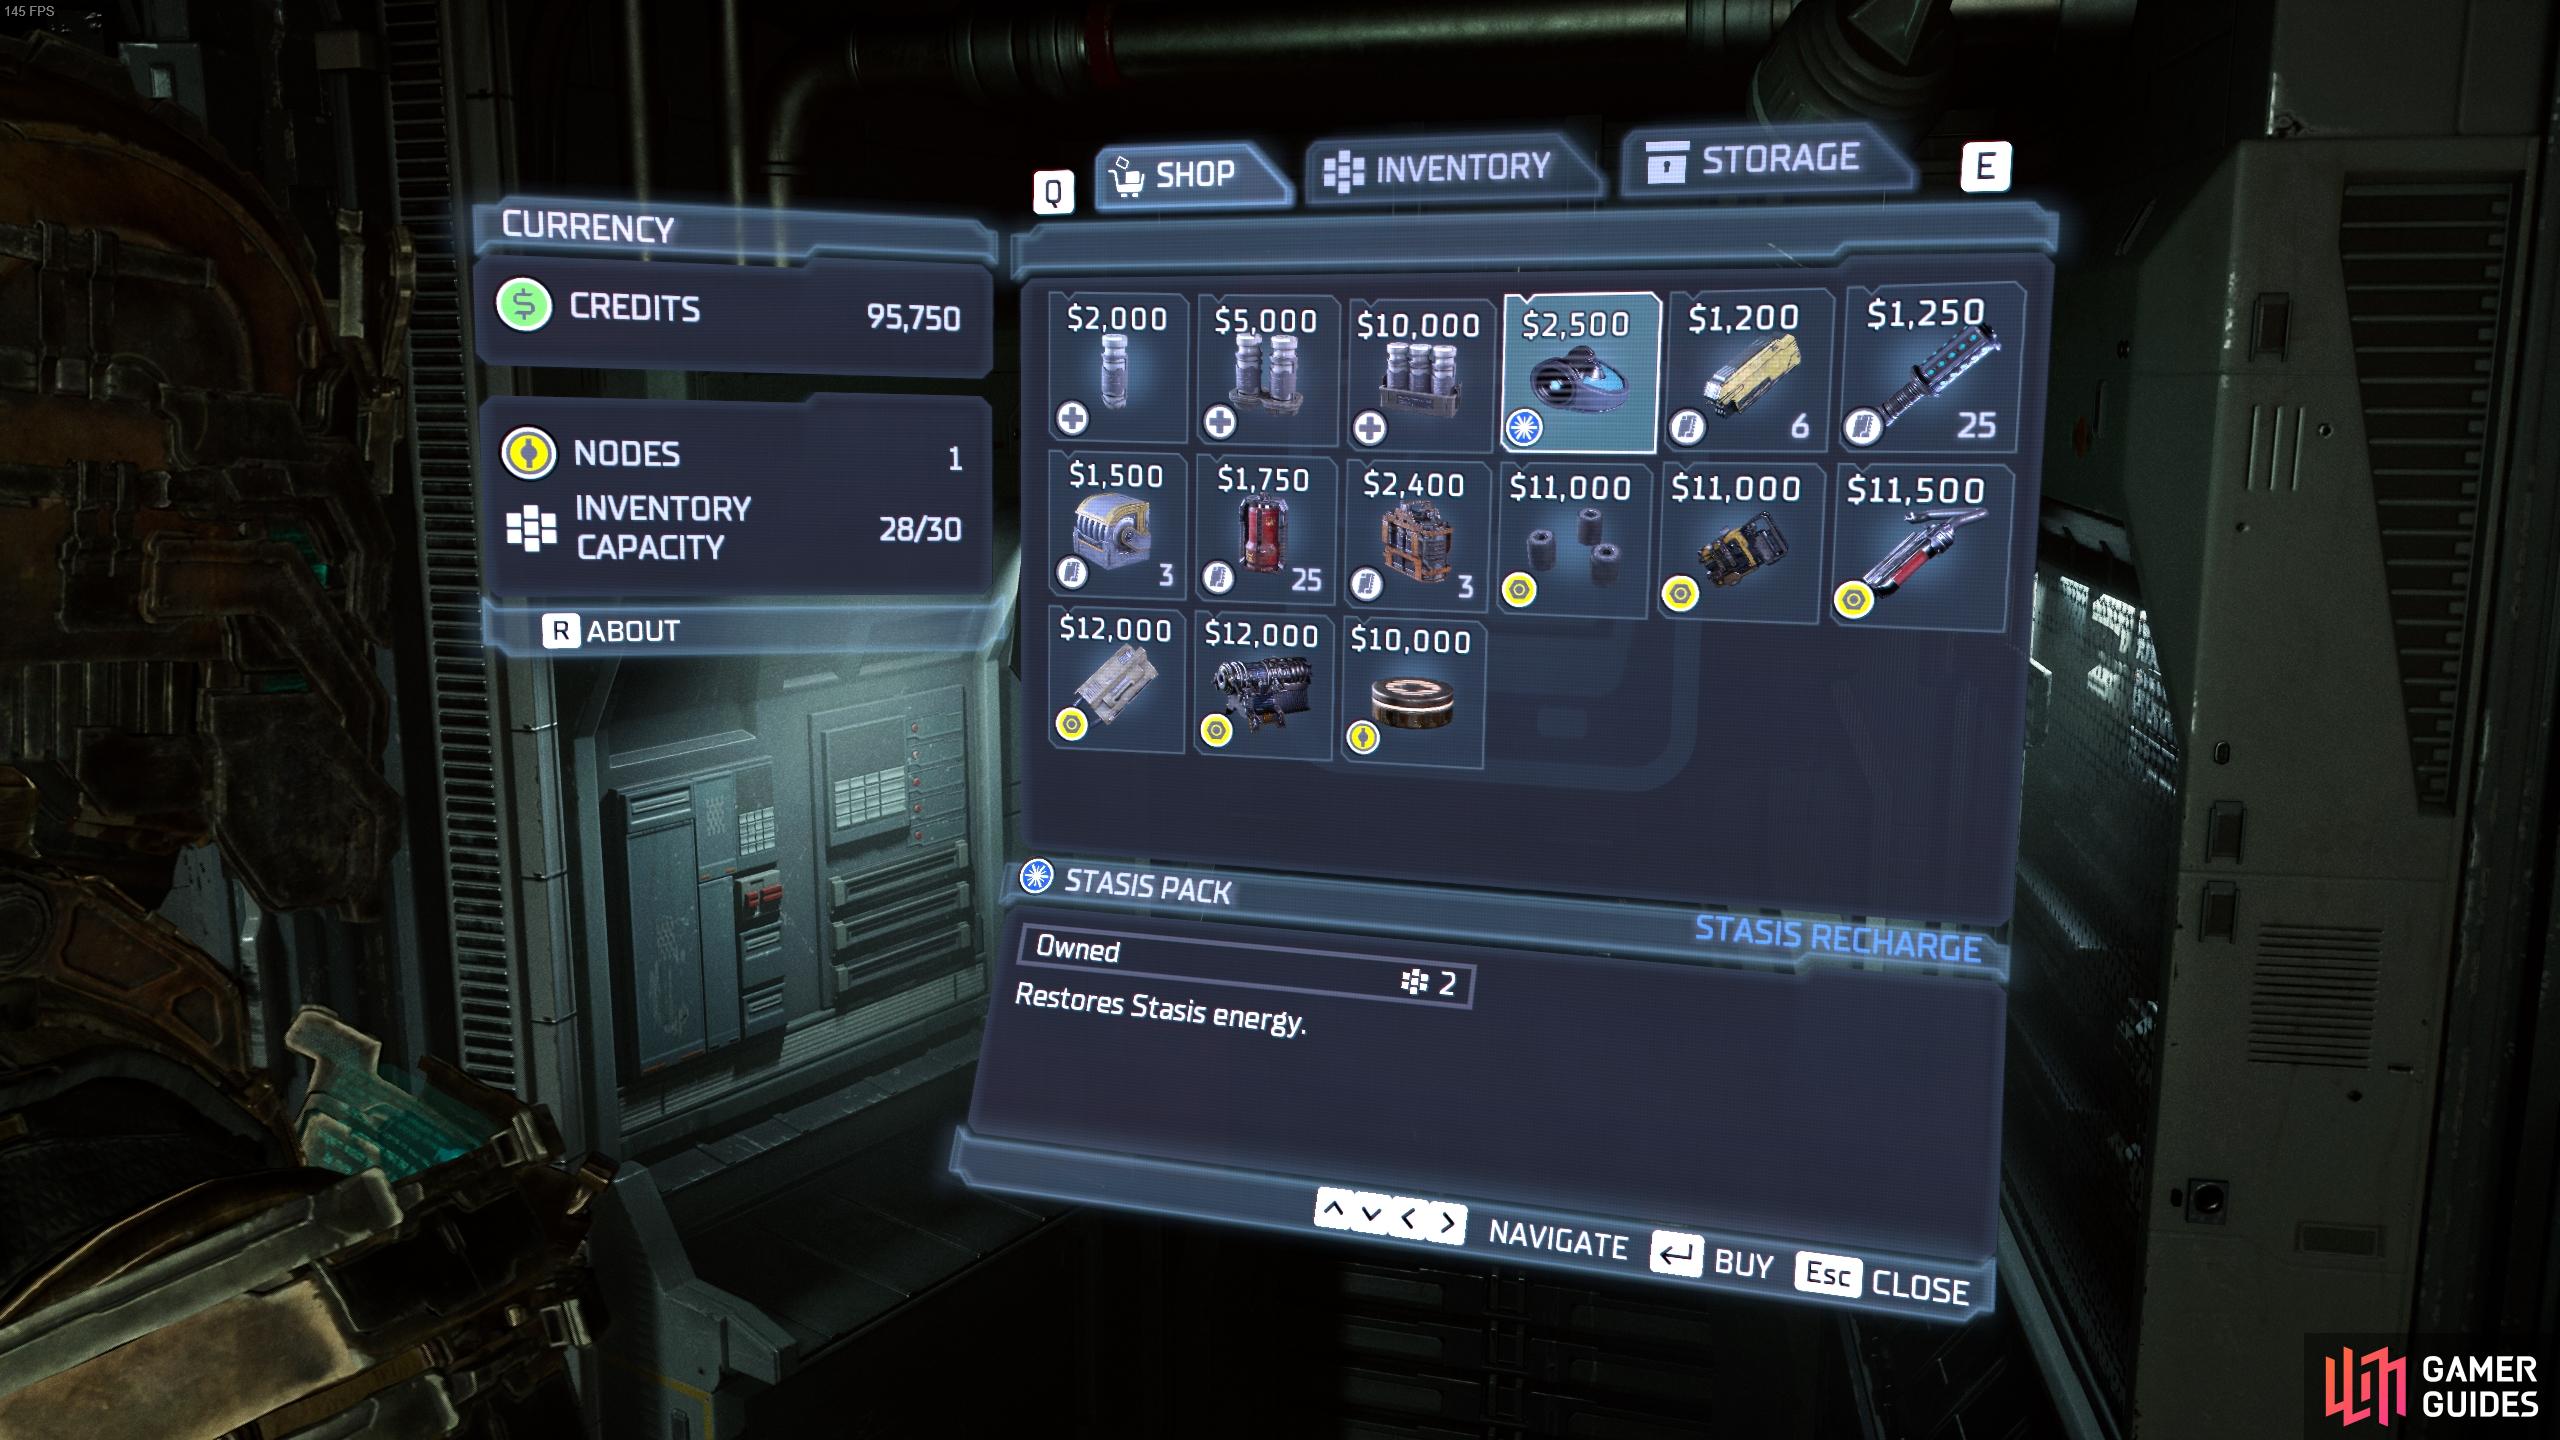 You can purchase as many portable Stasis Packs from the store as you require.